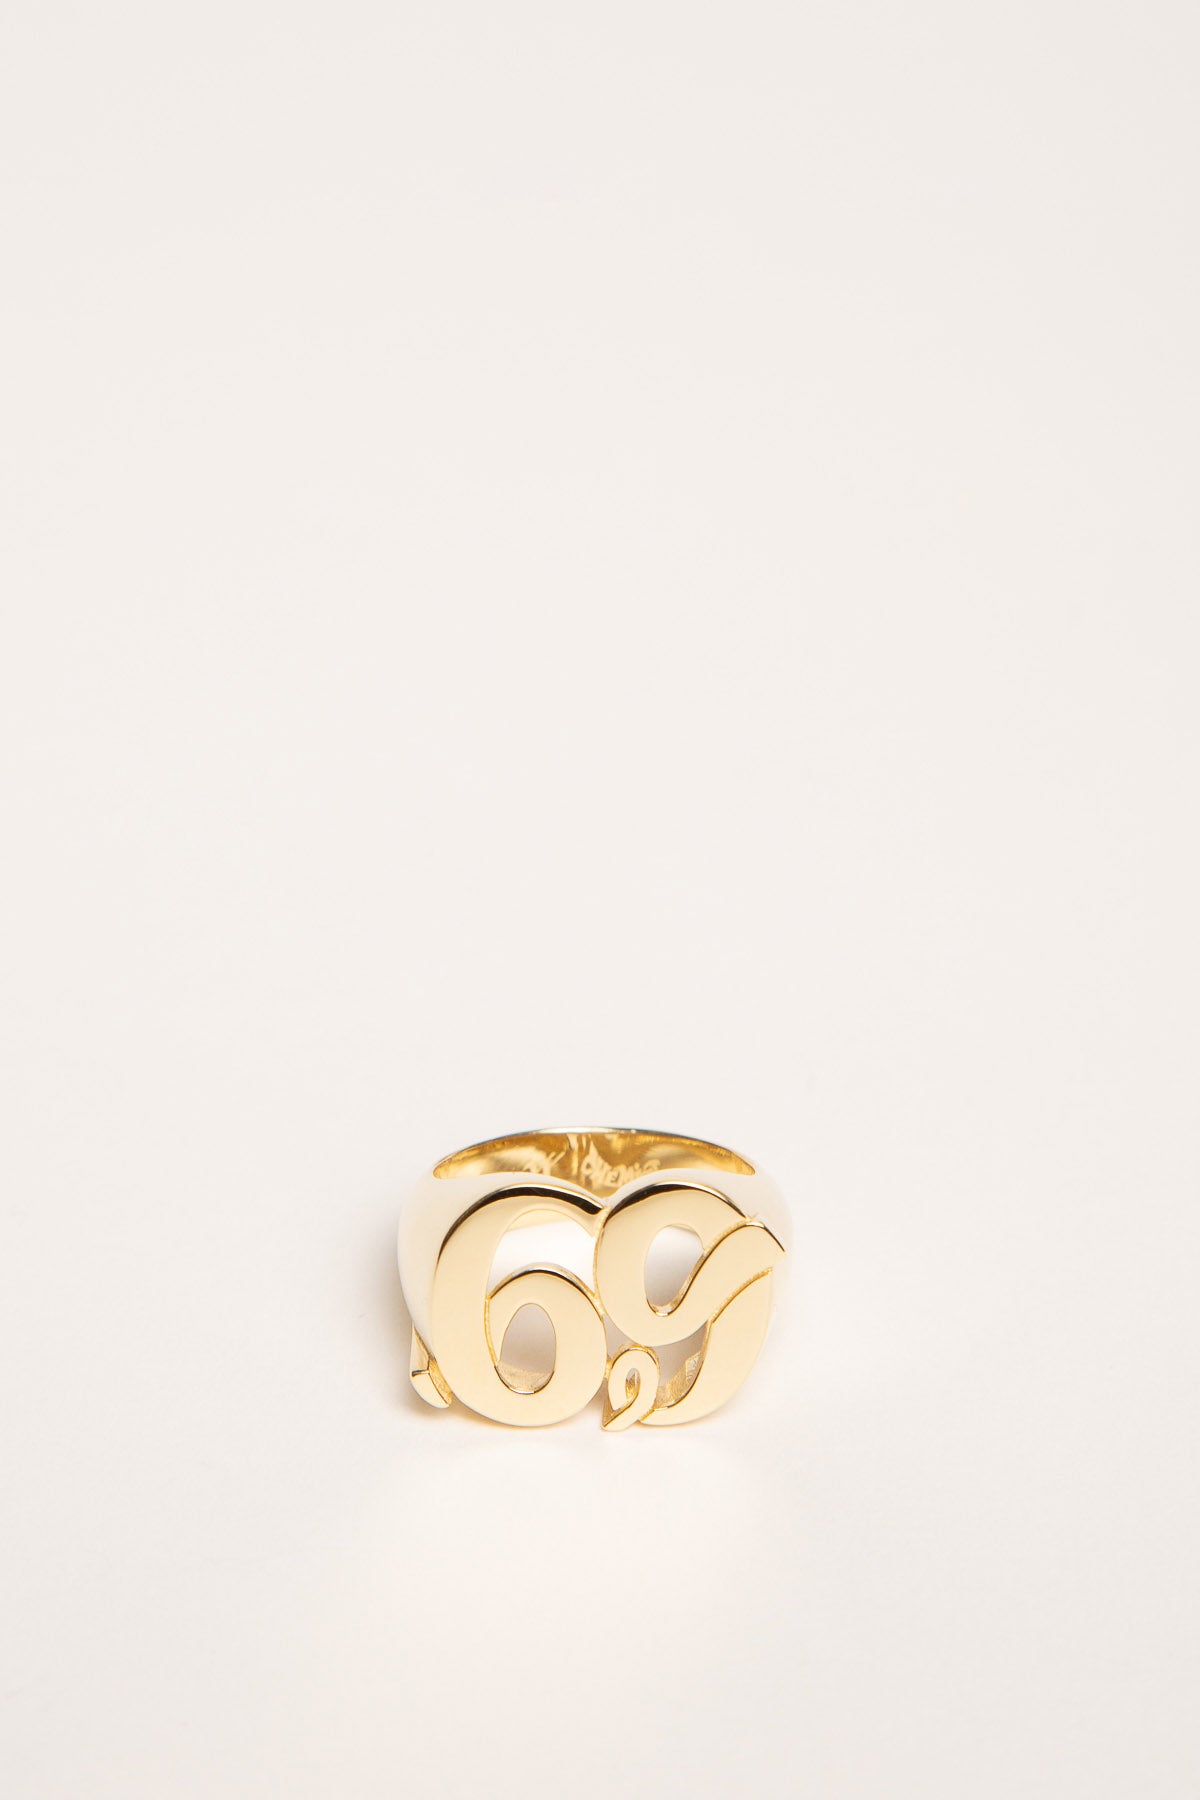 CHEMIST | YELLOW GOLD M FACE 69 RING